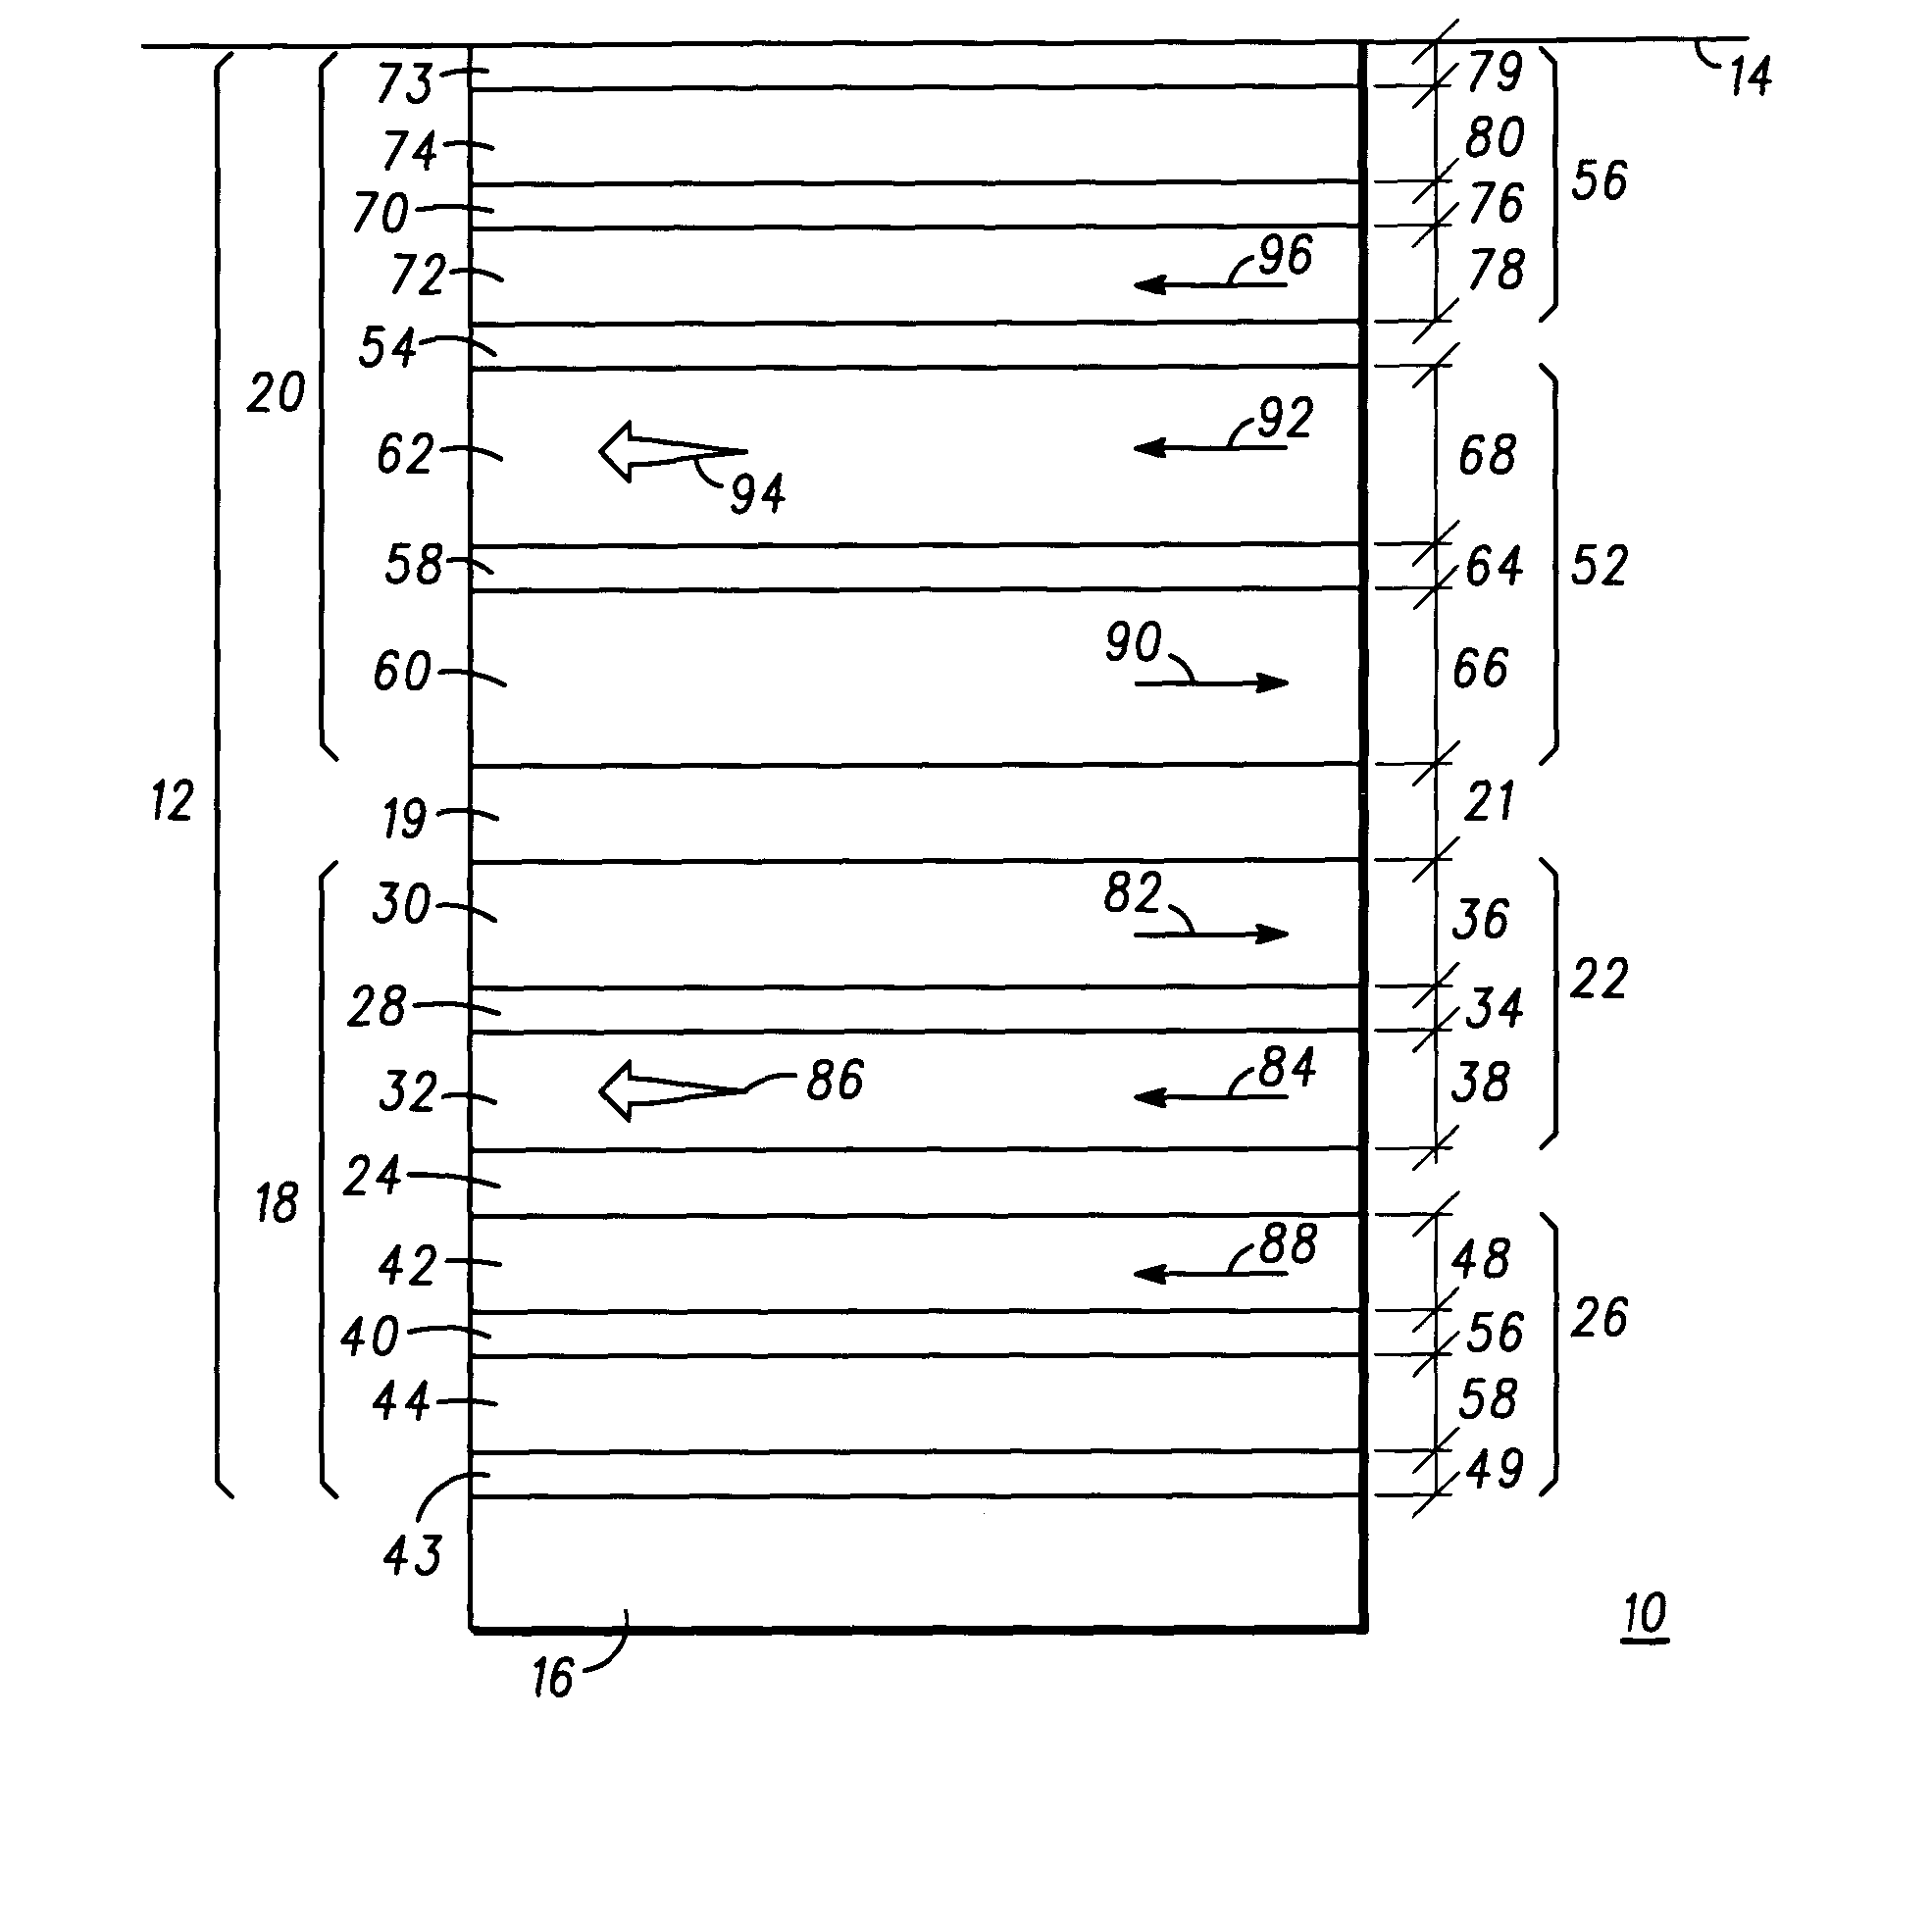 Method of writing to a multi-state magnetic random access memory cell